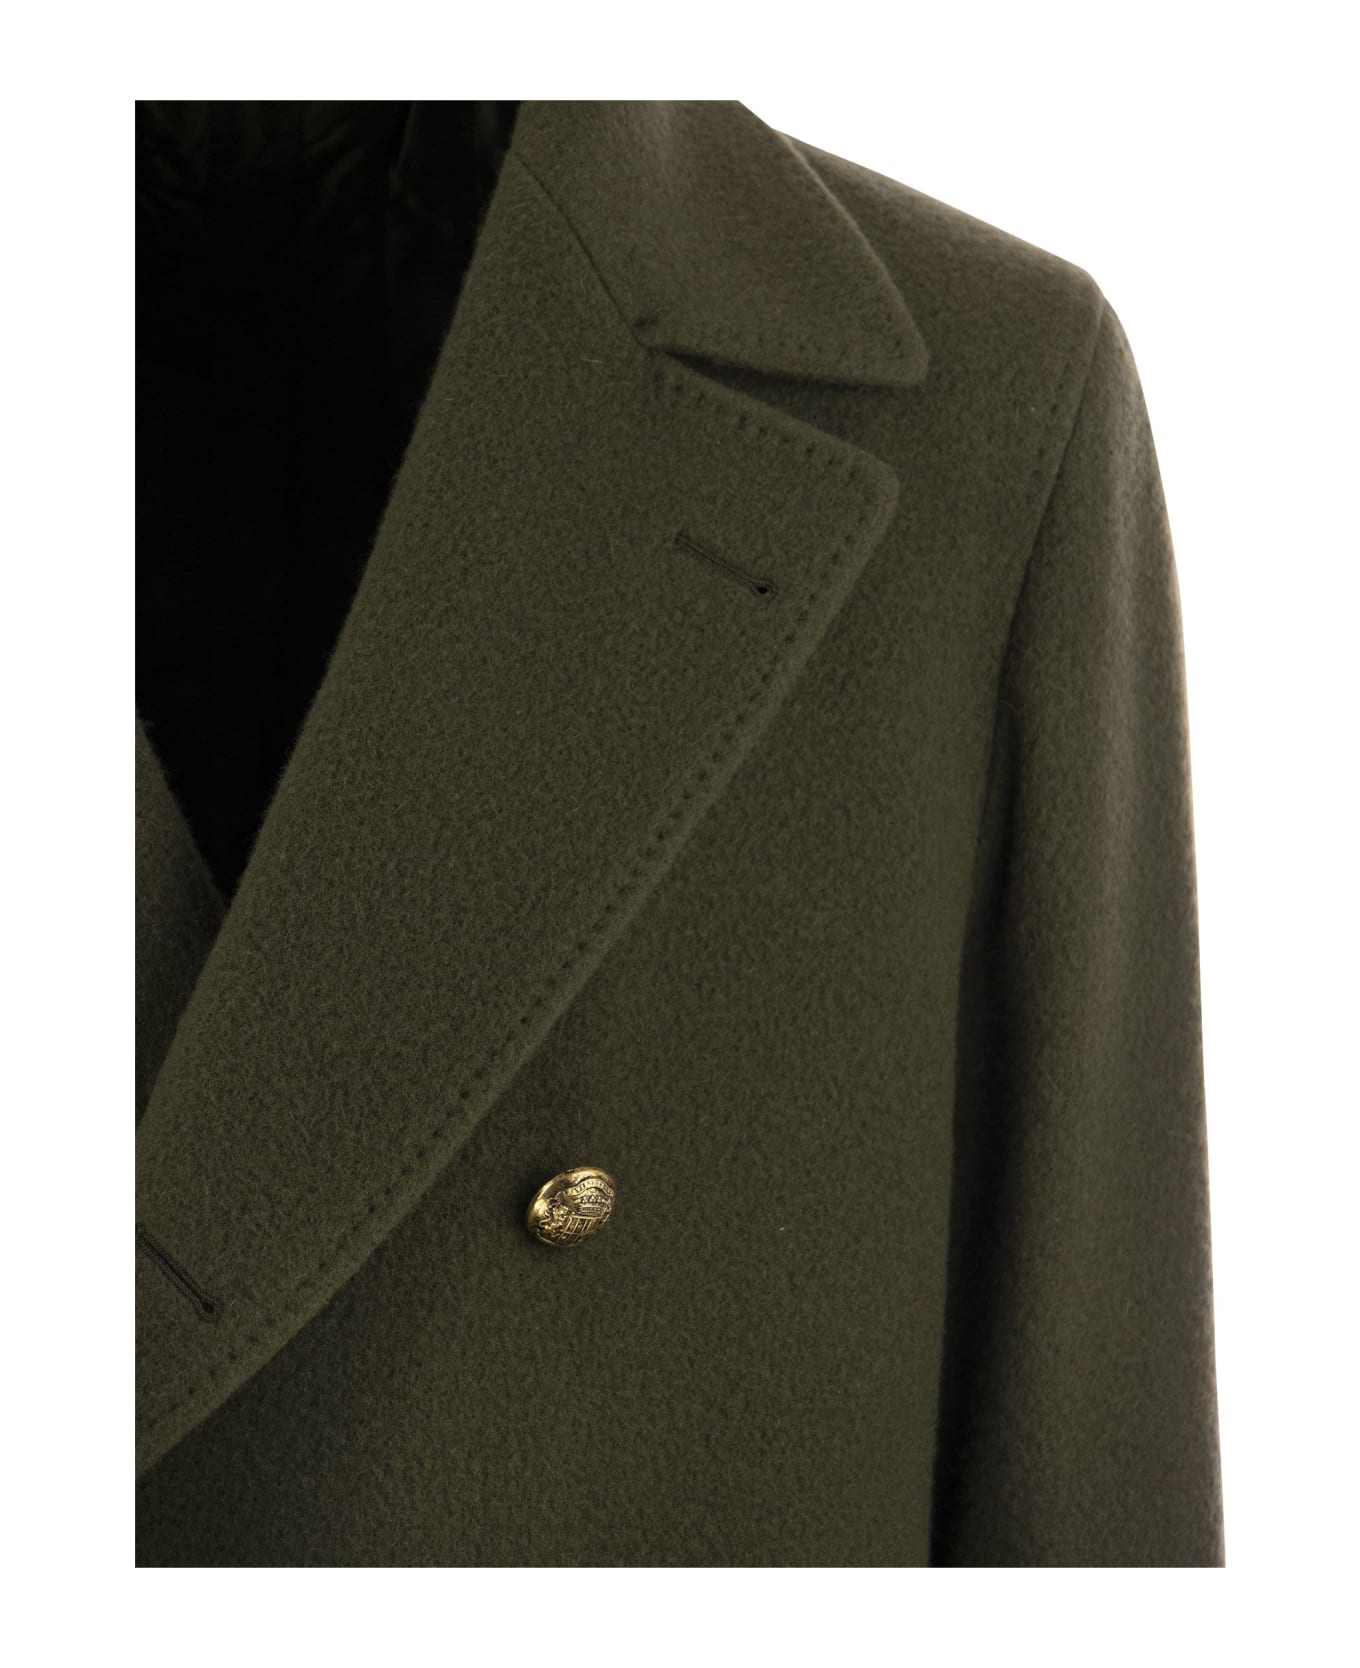 Tagliatore Arden - Double-breasted Wool Coat - Military Green